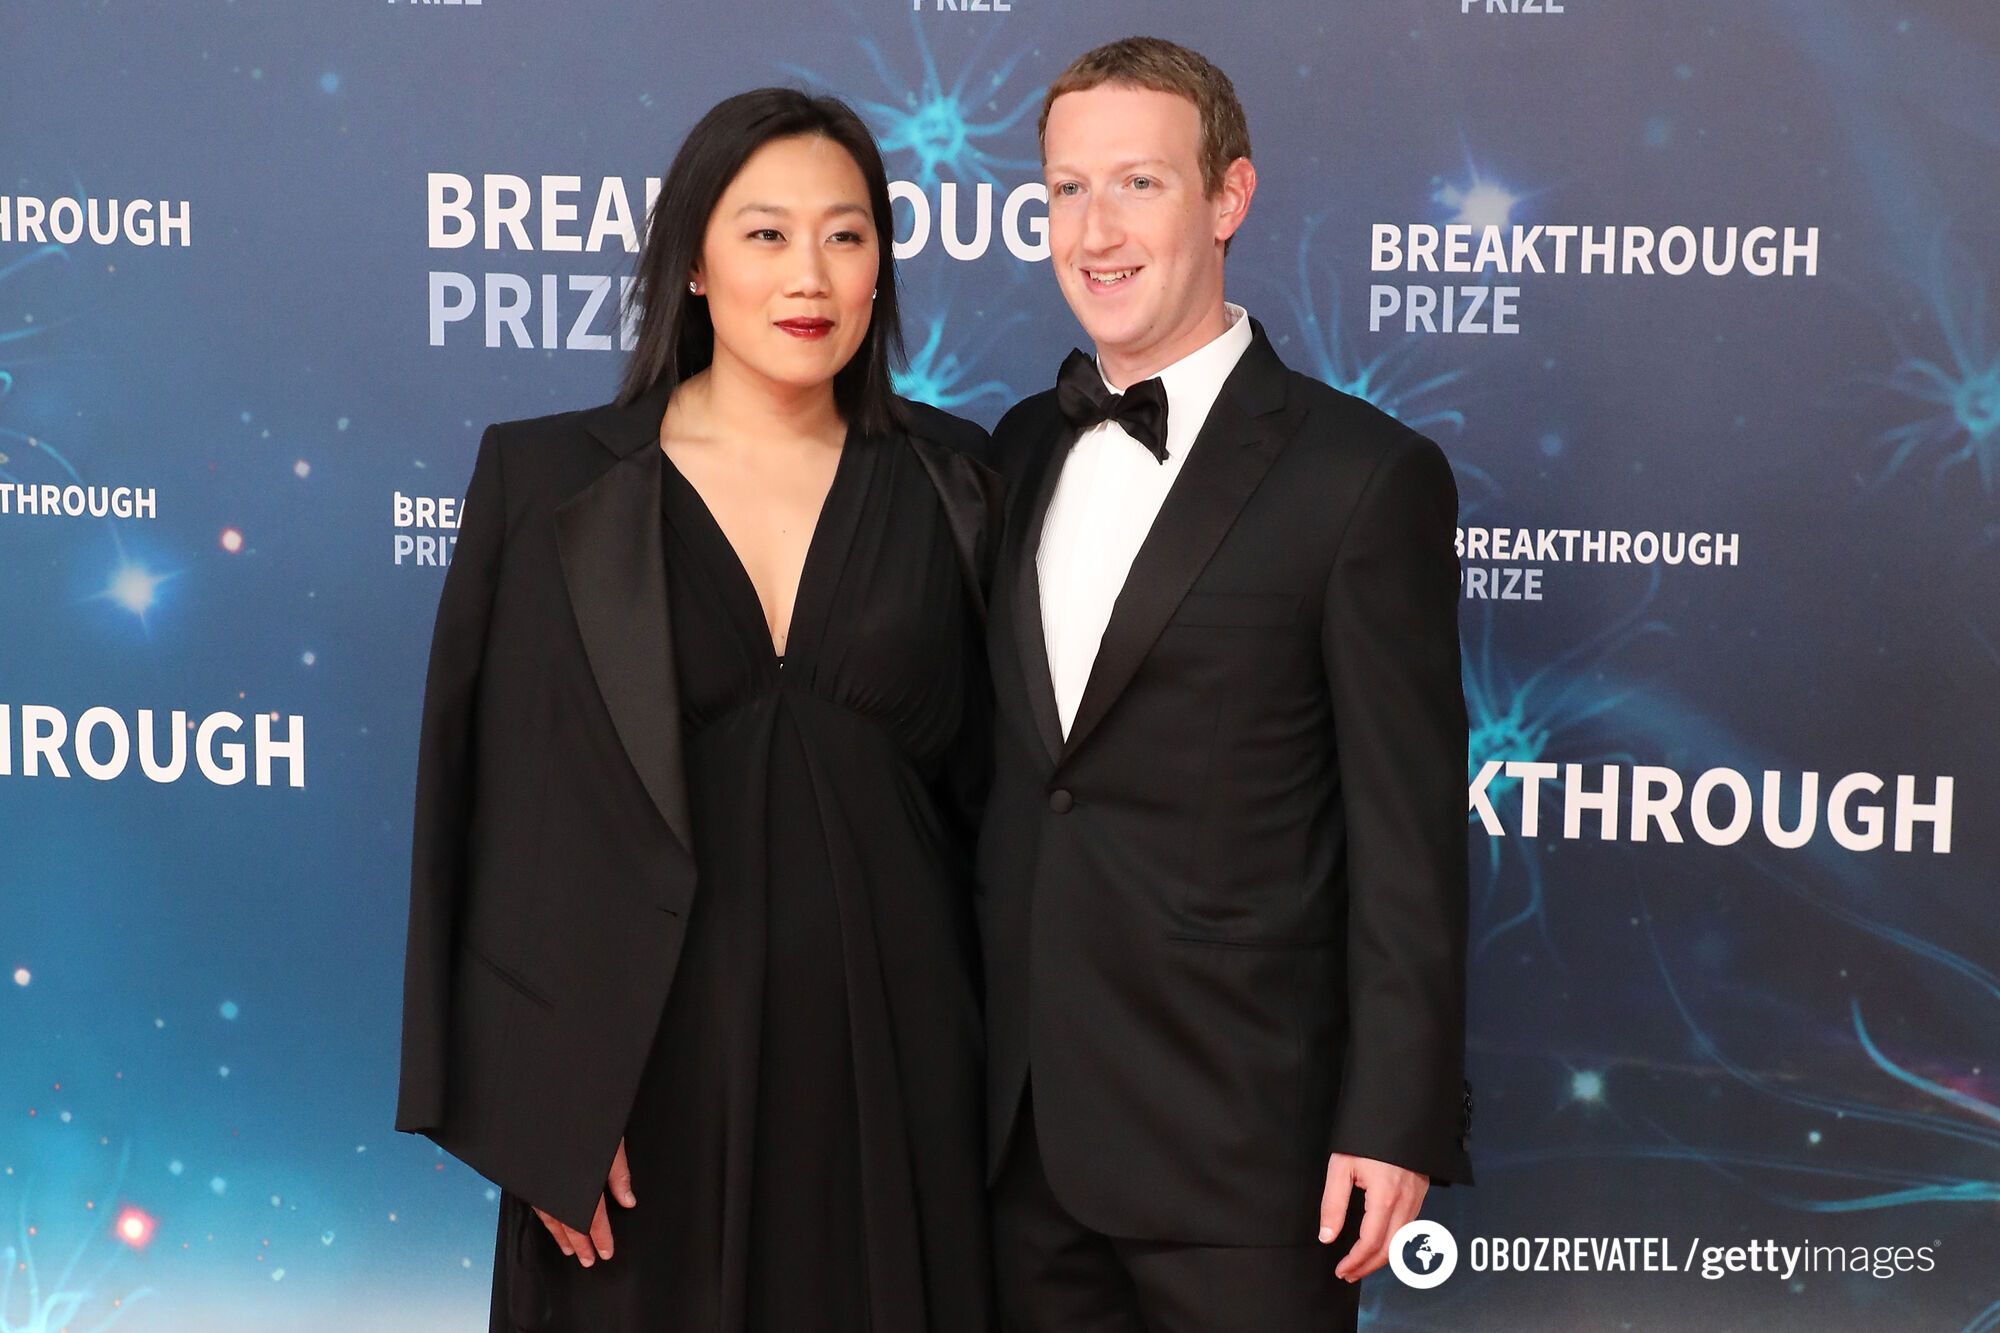 Zuckerberg reveals what his first date with his future wife was like 20 years ago. The romantic story of the couple in photos